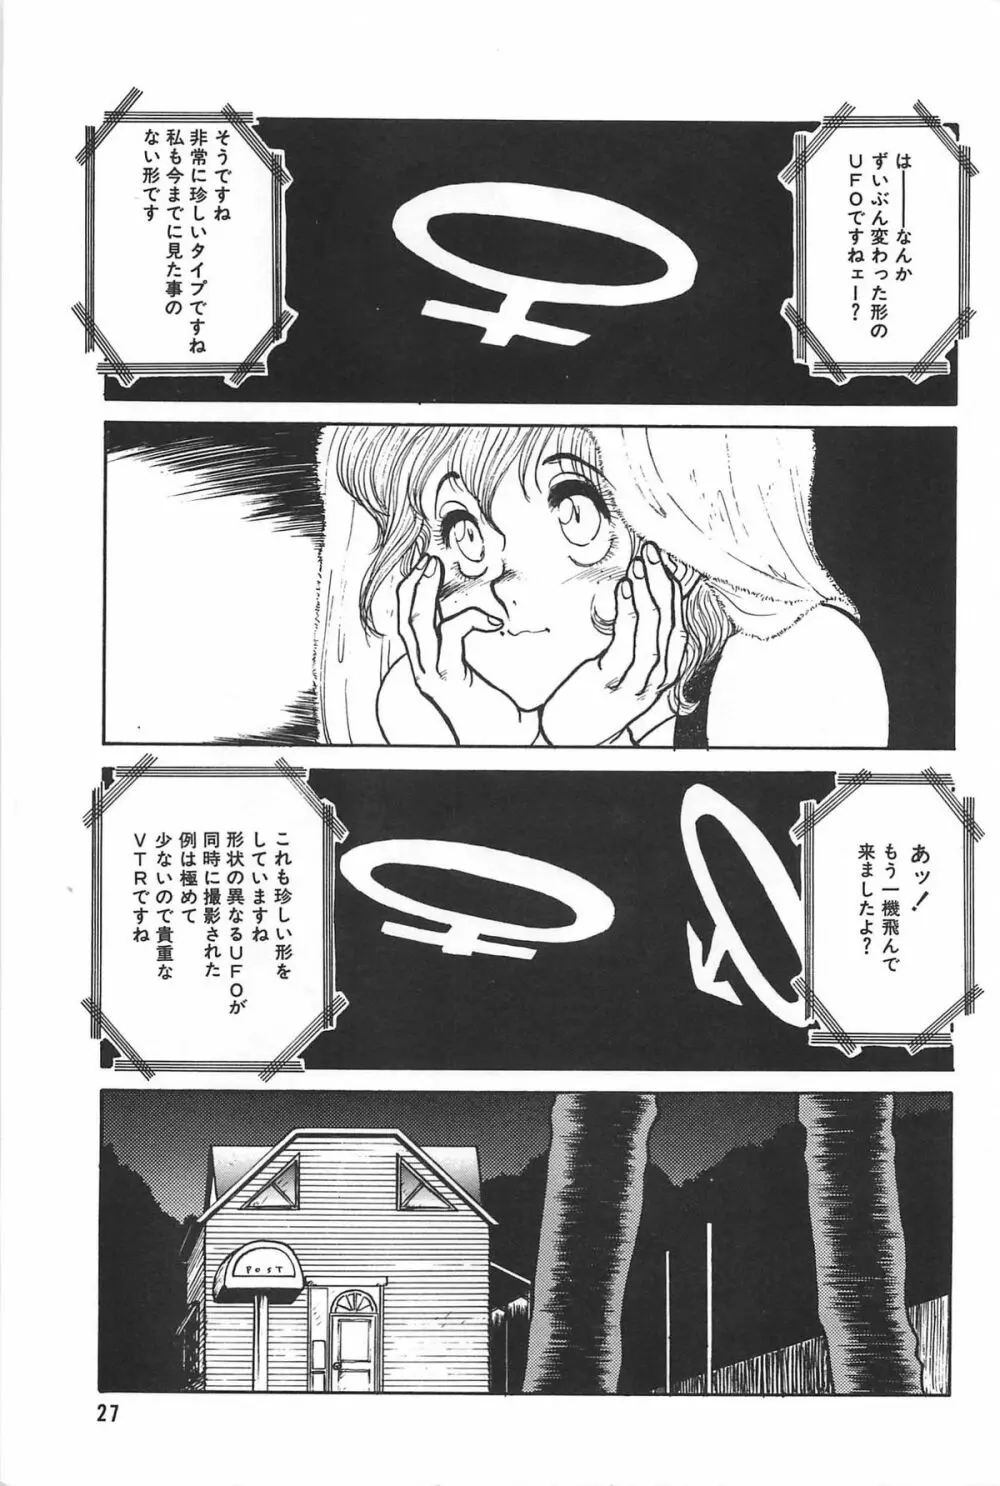 LOVE ME 1995 Page.29